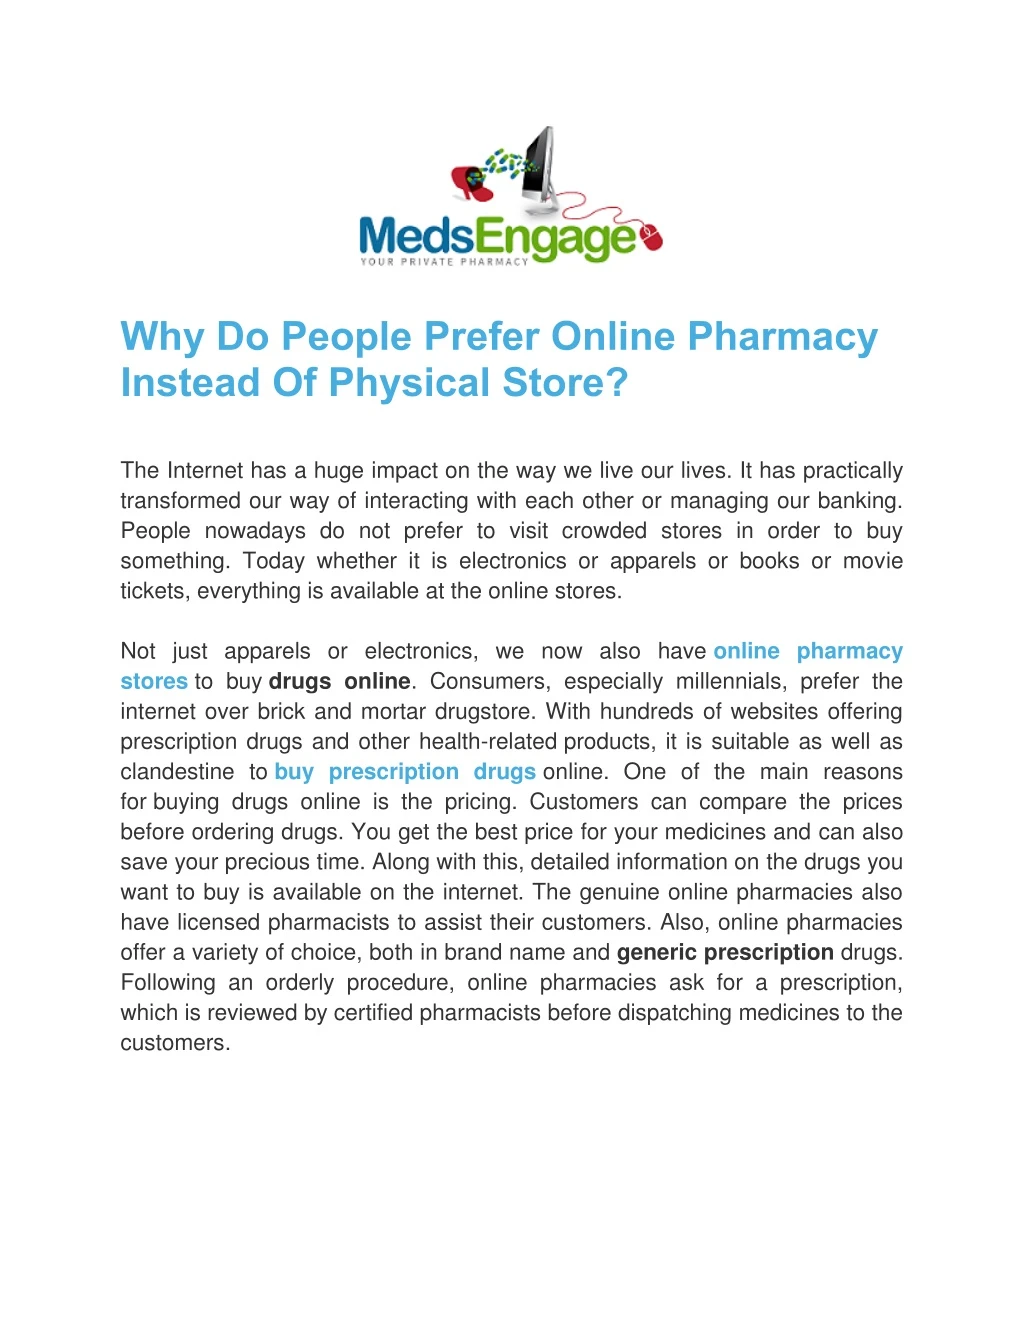 why do people prefer online pharmacy instead